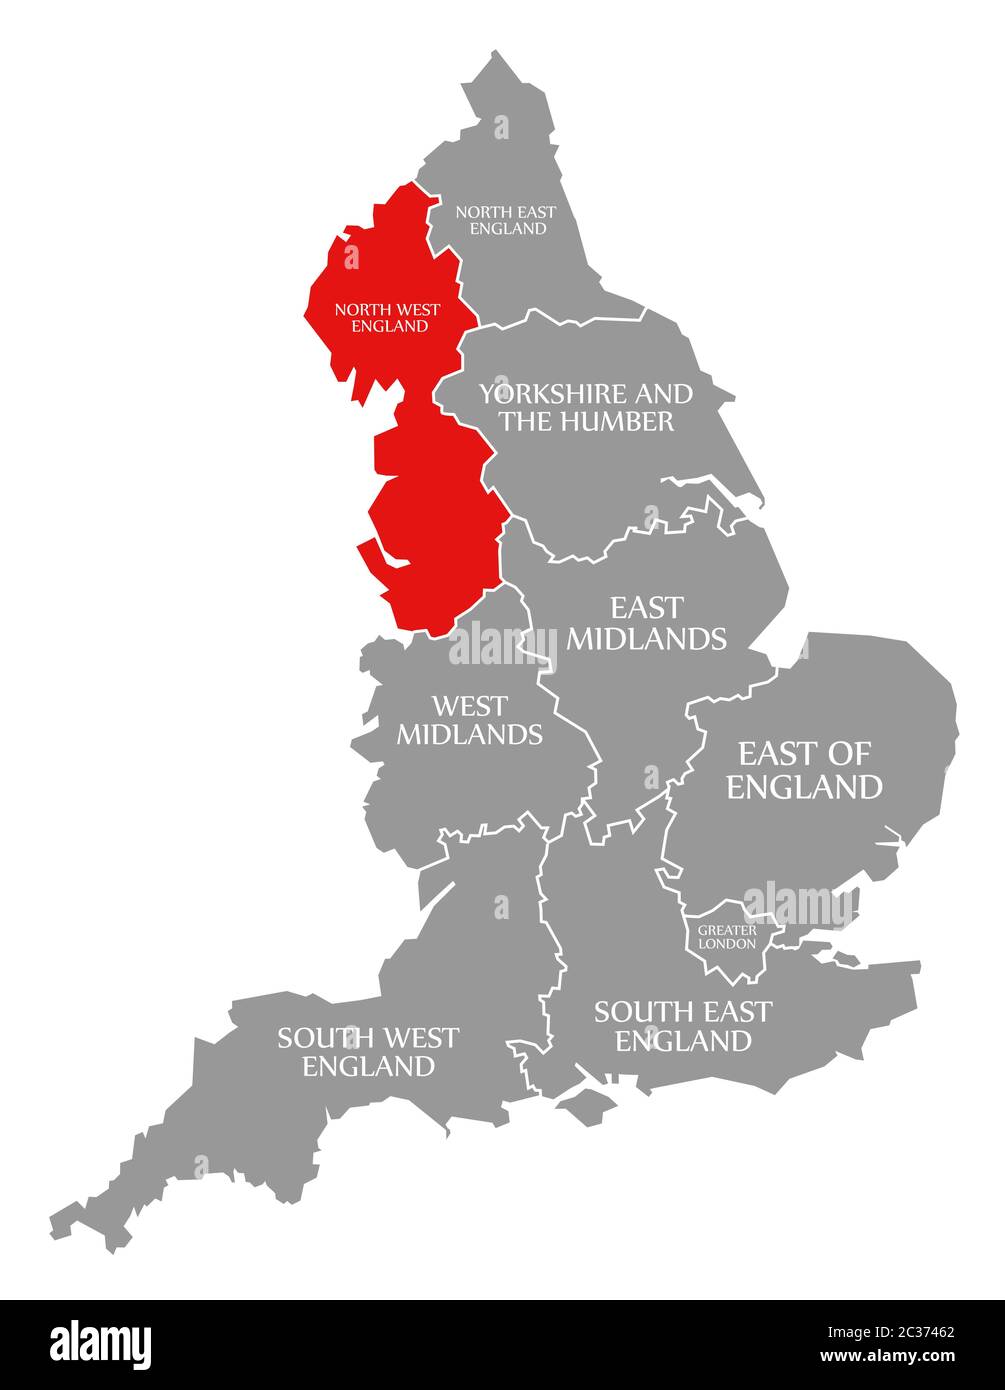 North West England red highlighted in map of England UK Stock Photo